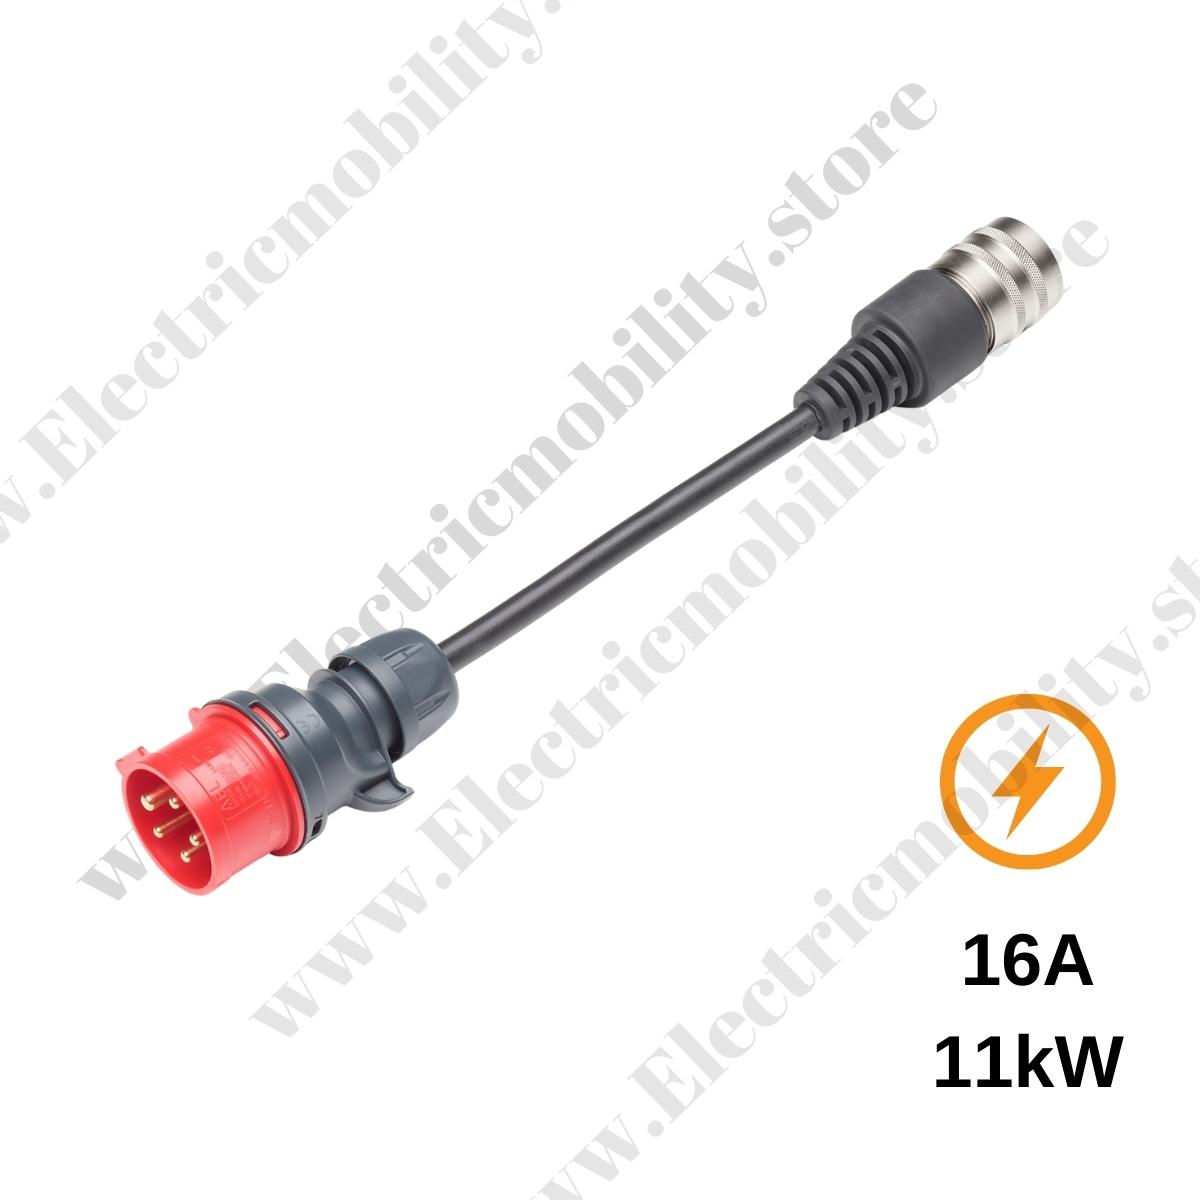 400V/16A Juice Booster 2 Juice Connector Adaptateur CEE16 Rouge 11kW 